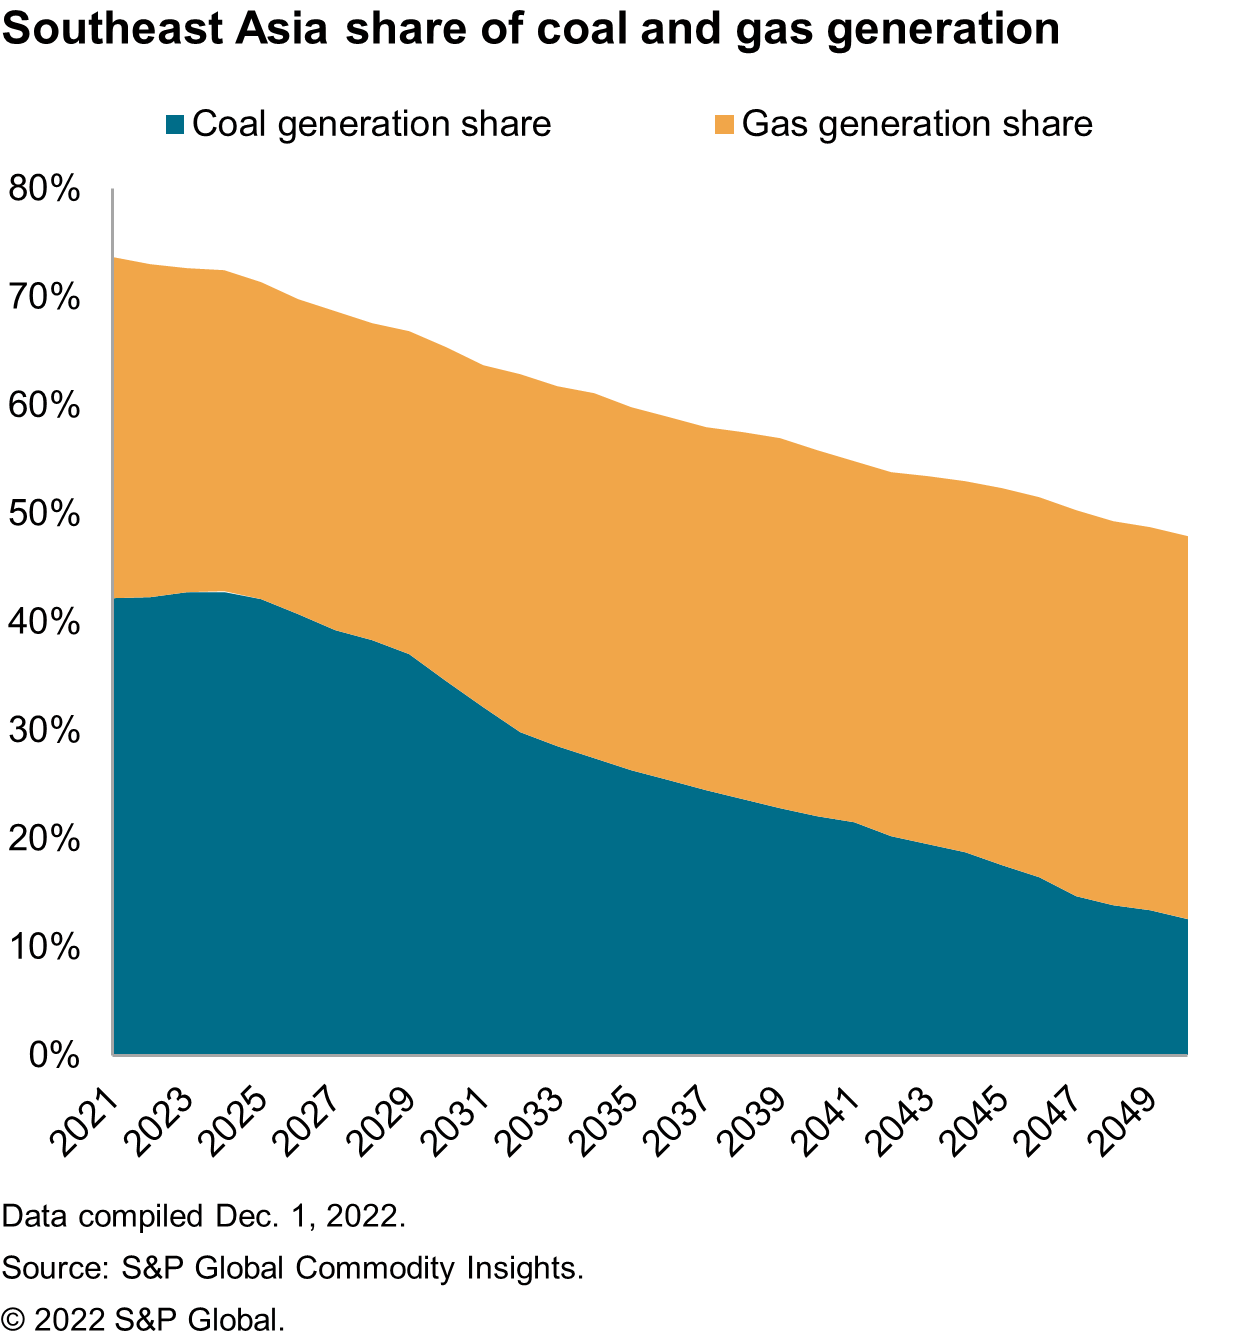 Southeast Asia share of coal and gas generation